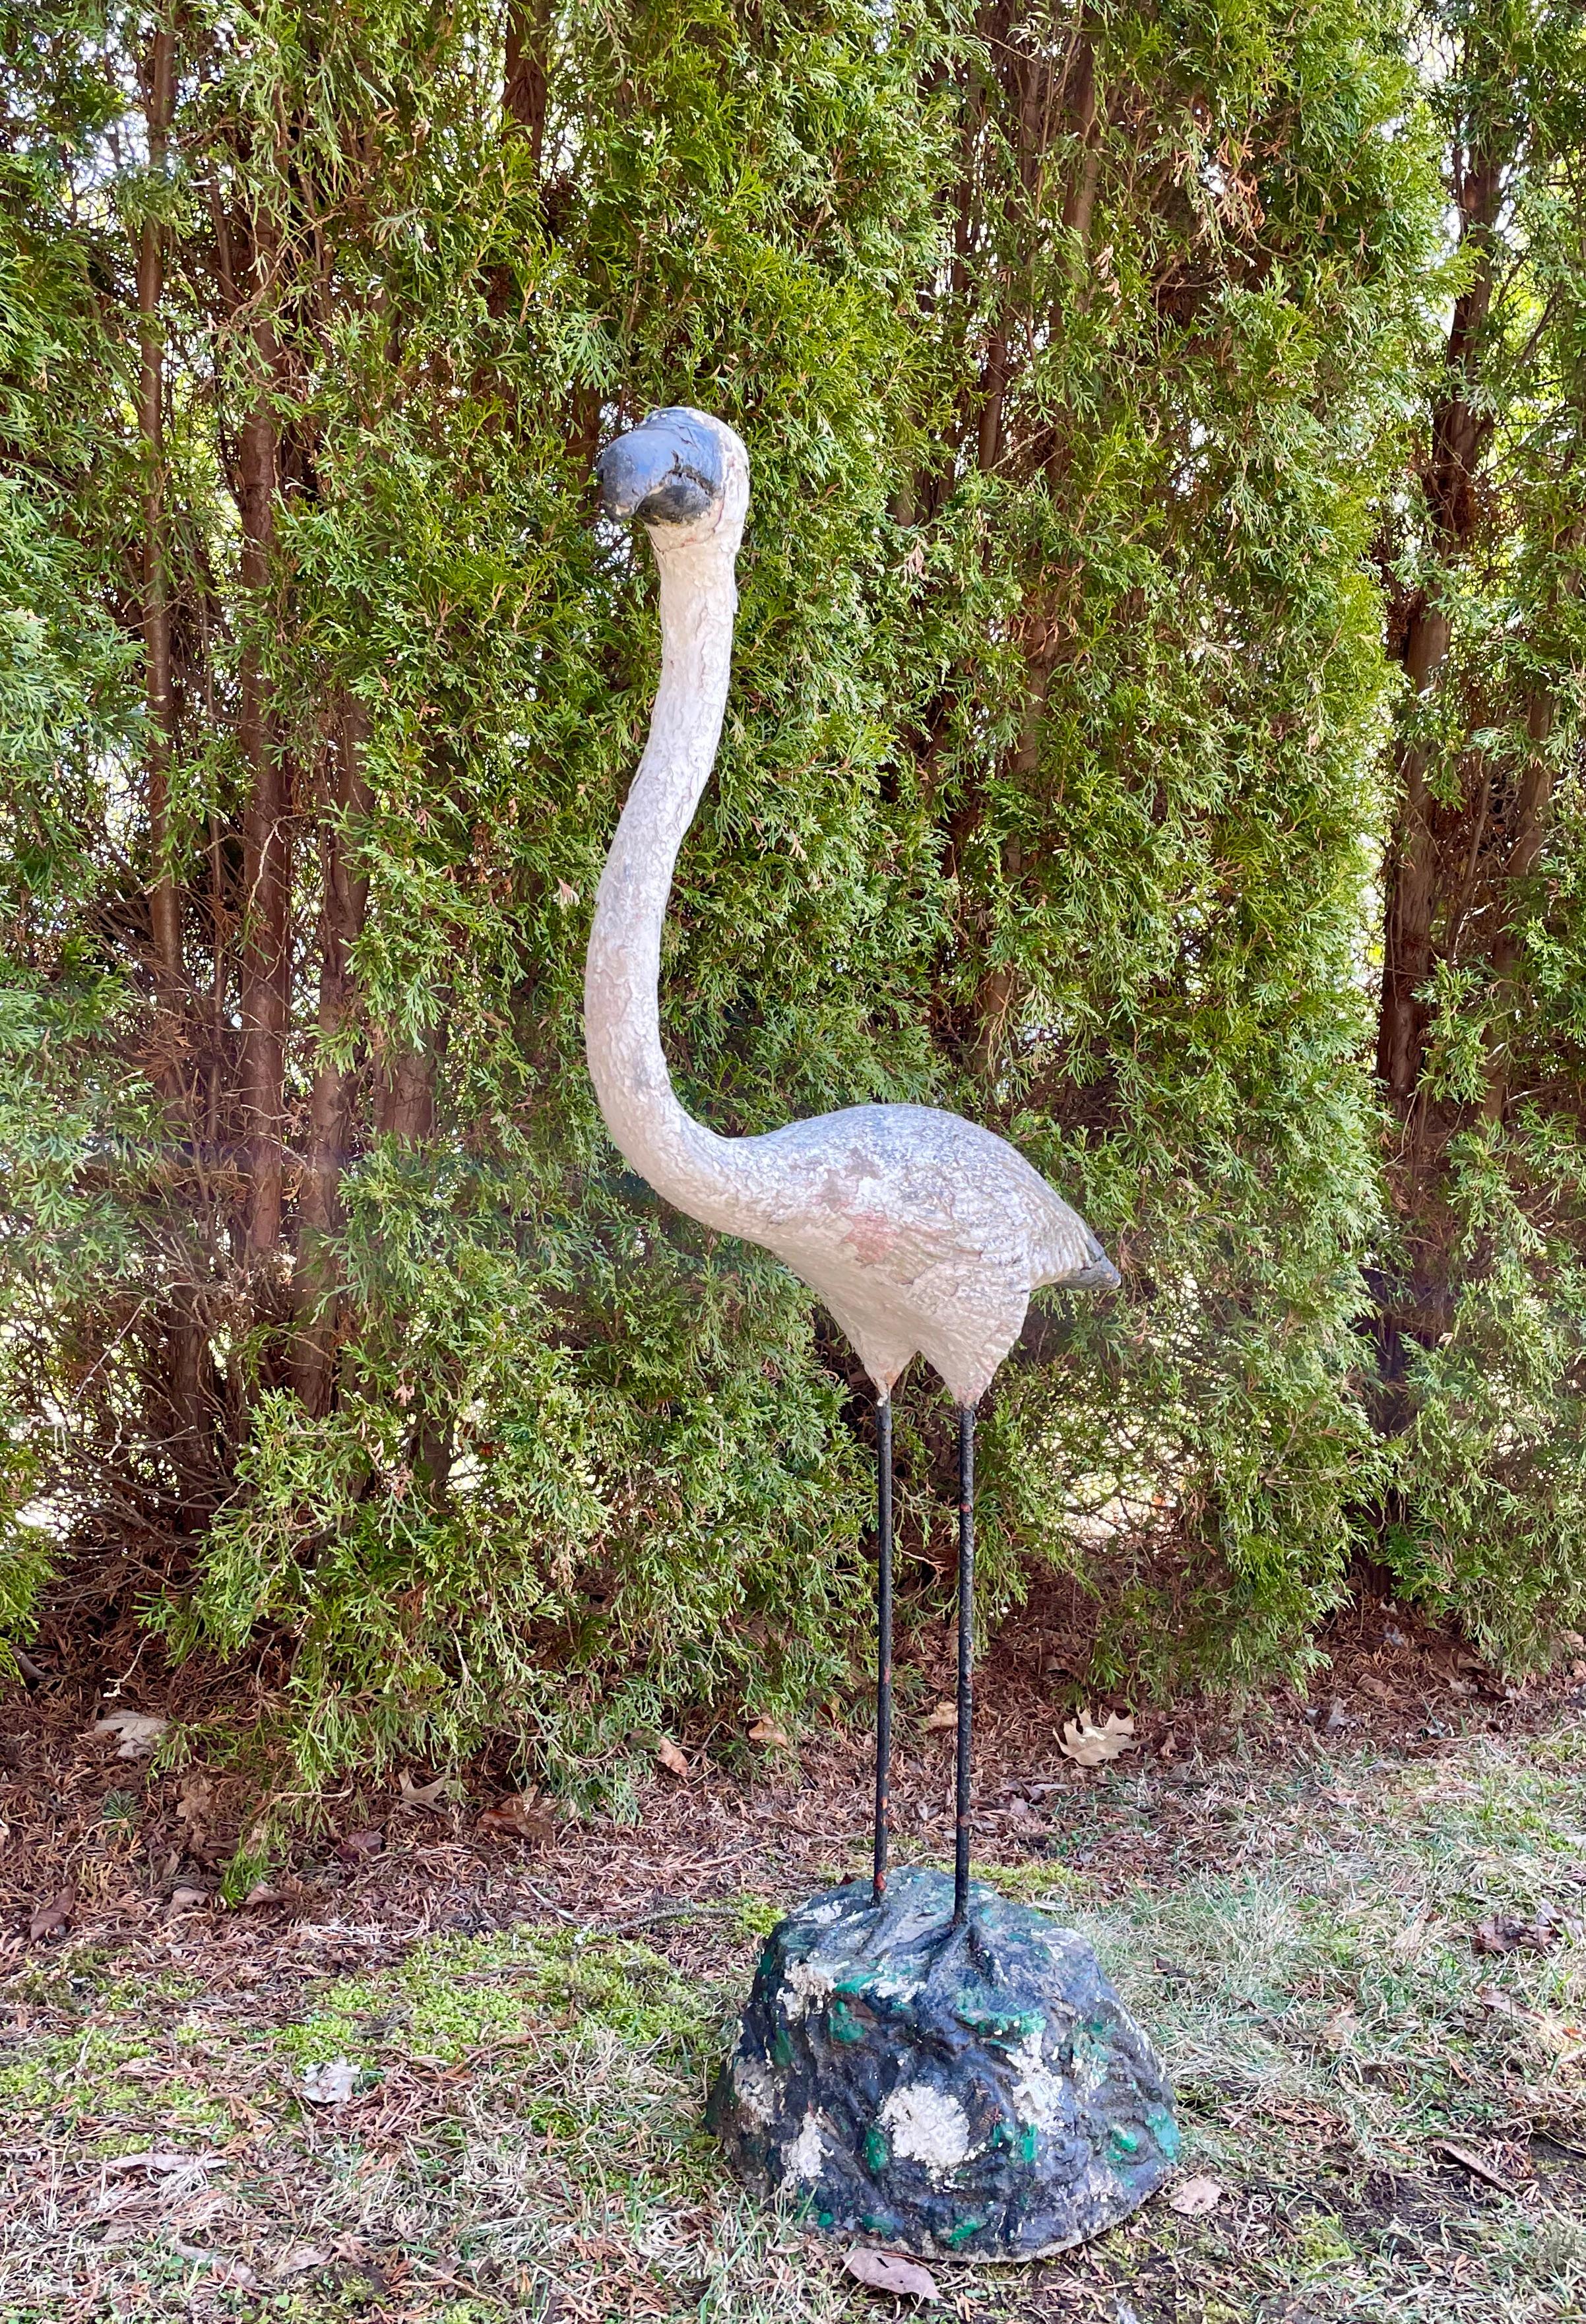 We jumped at the chance to buy this grouping of three French flamingos, and this is the pale pink and white flamingo with a black beak. Made of cast stone with iron legs, and very solid, he cuts a dashing figure with a beautiful weathered surface